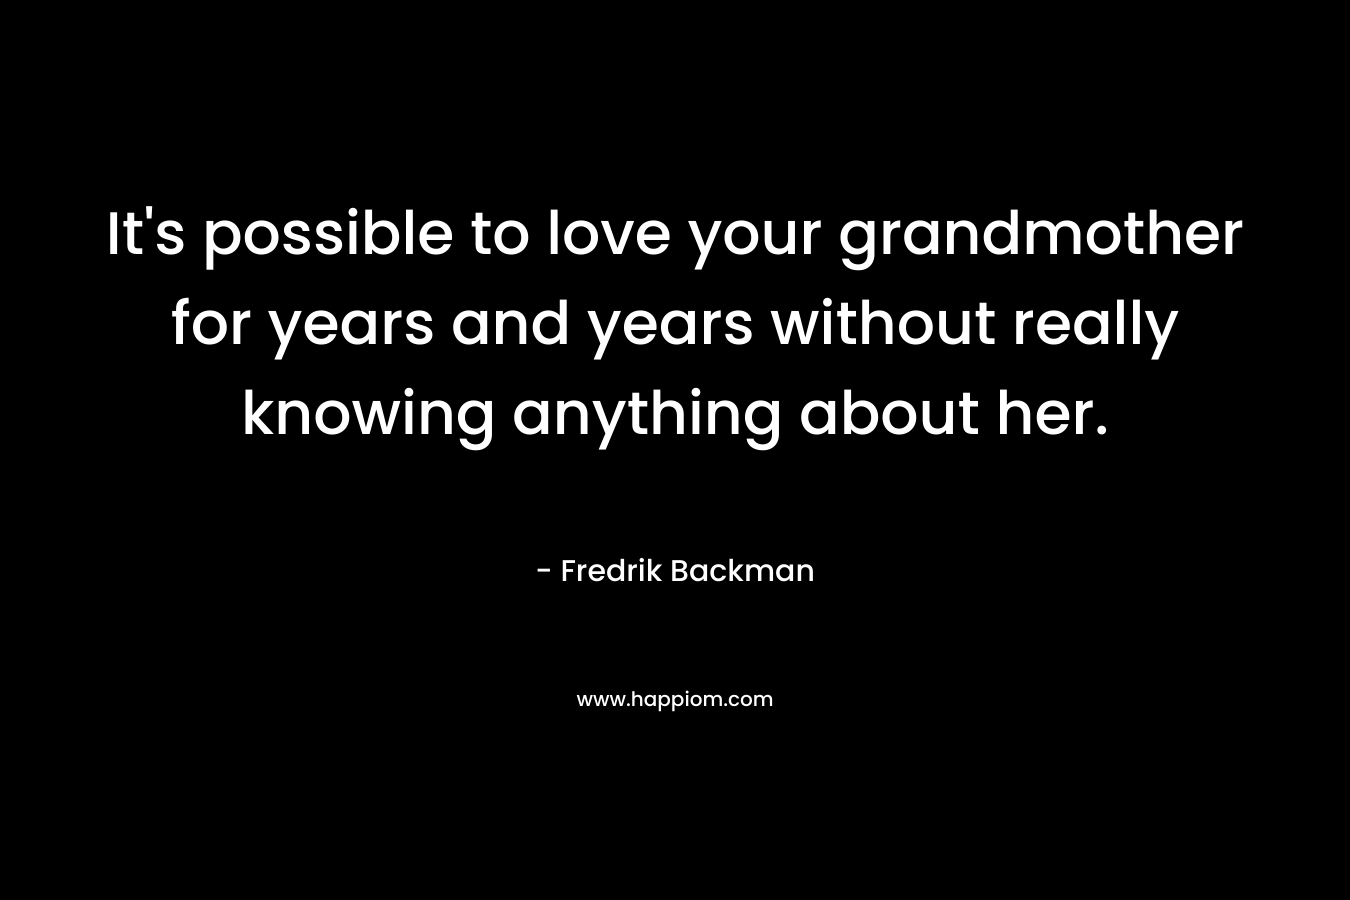 It’s possible to love your grandmother for years and years without really knowing anything about her. – Fredrik Backman